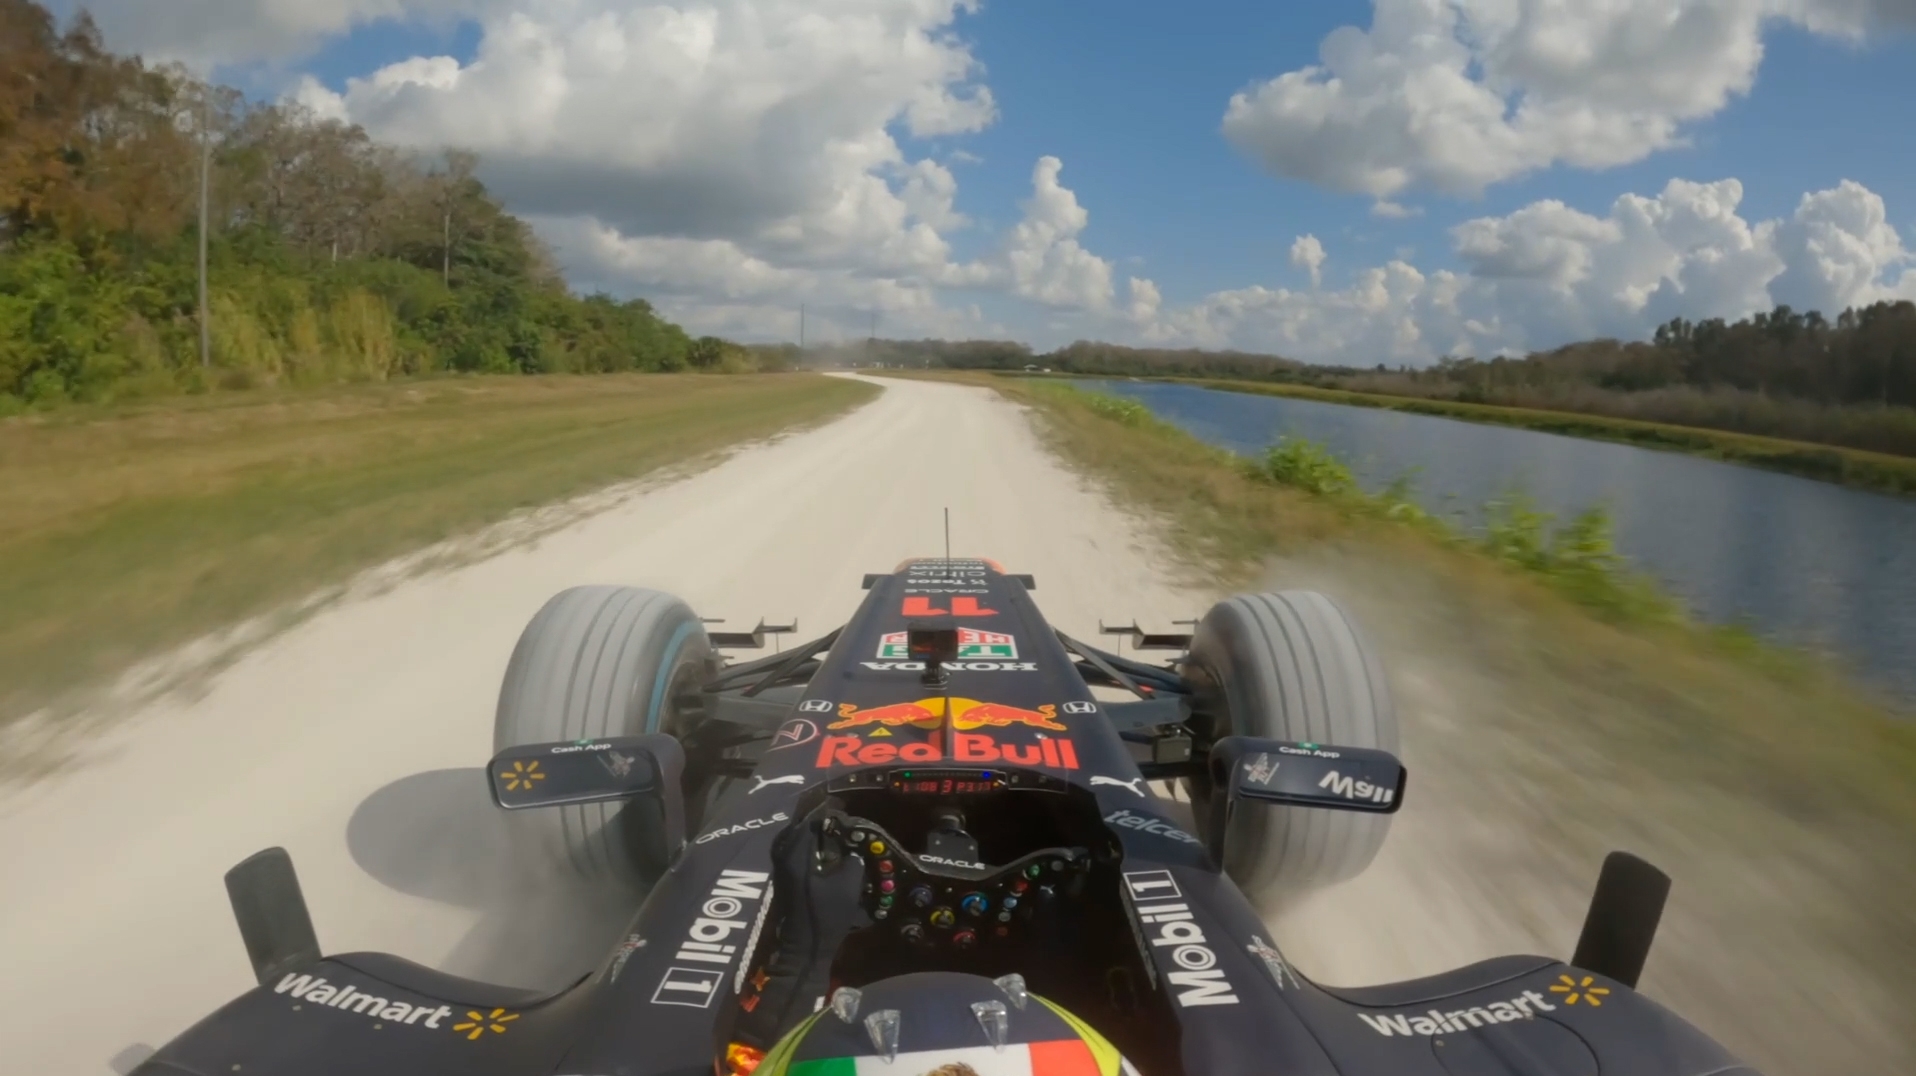 Perez drives his Red Bull on epic American road trip to Miami GP - Stream the Video